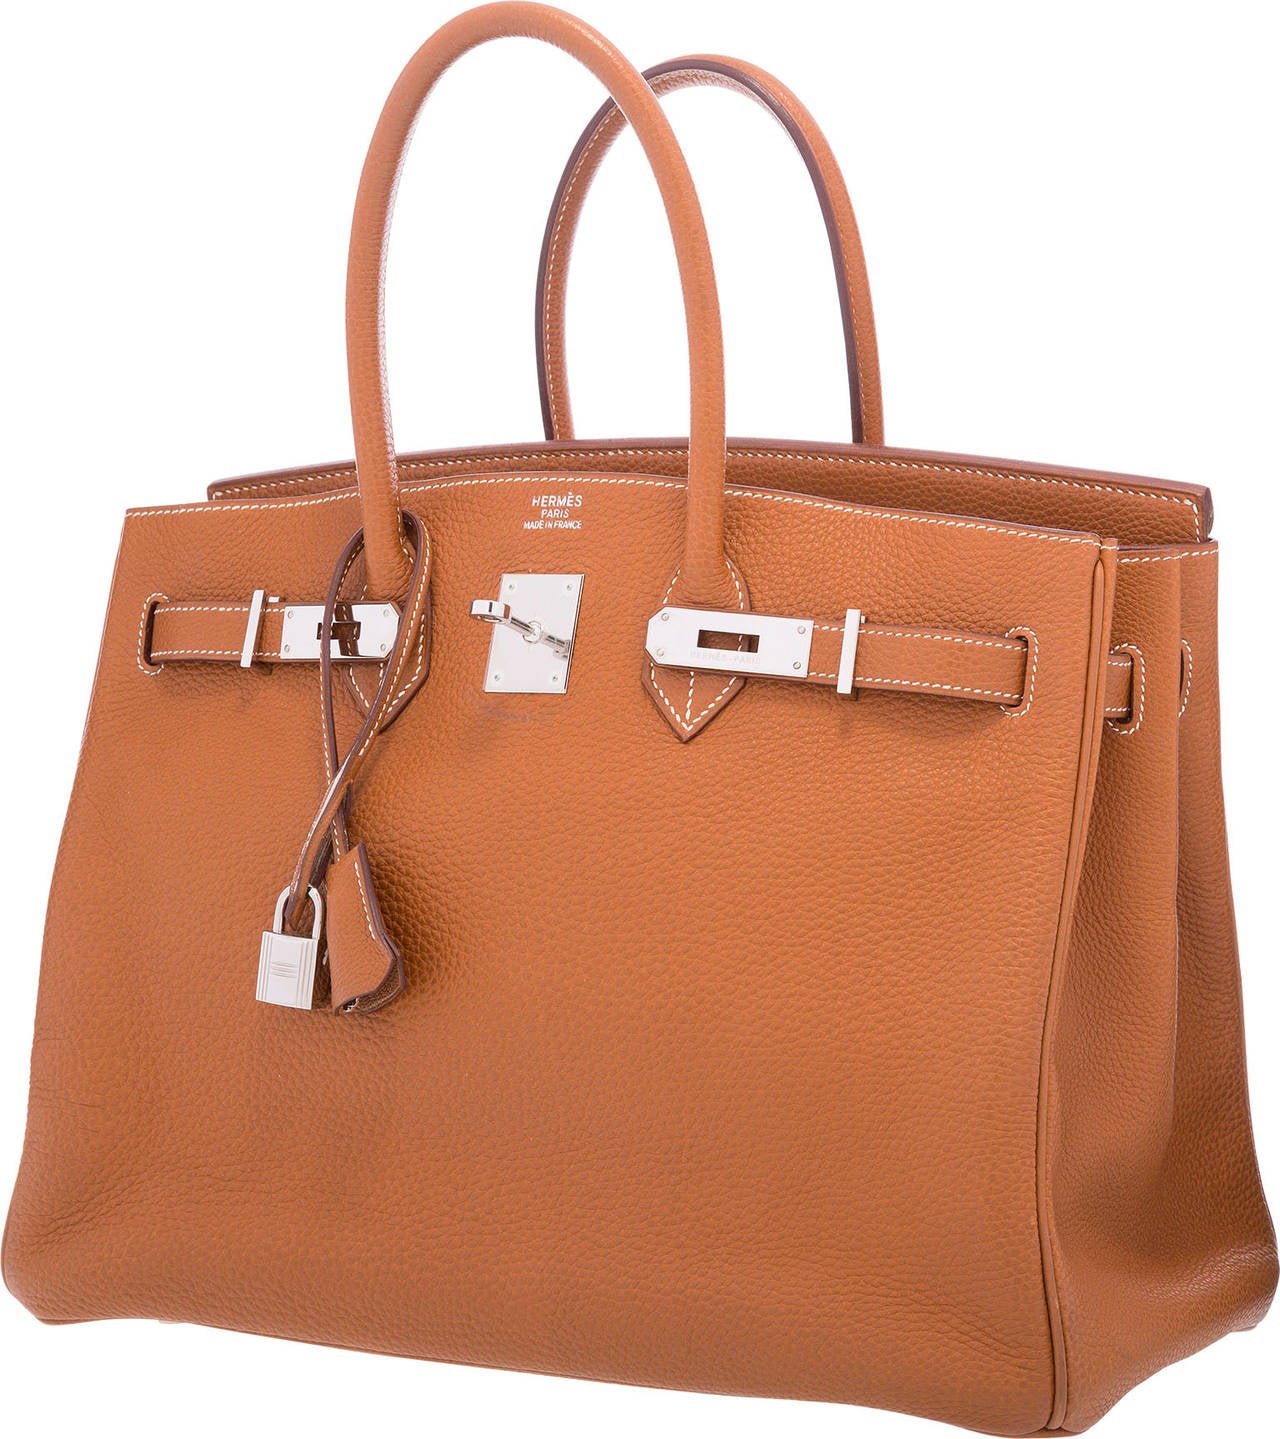 The Birkin is a timeless accessory, and this particular Birkin is as classic and straightforward as it gets.  This bag is extremely wearable and can be carried year-round.  It is done in Gold Fjord Leather with Gold Hardware. Gold is a leather color